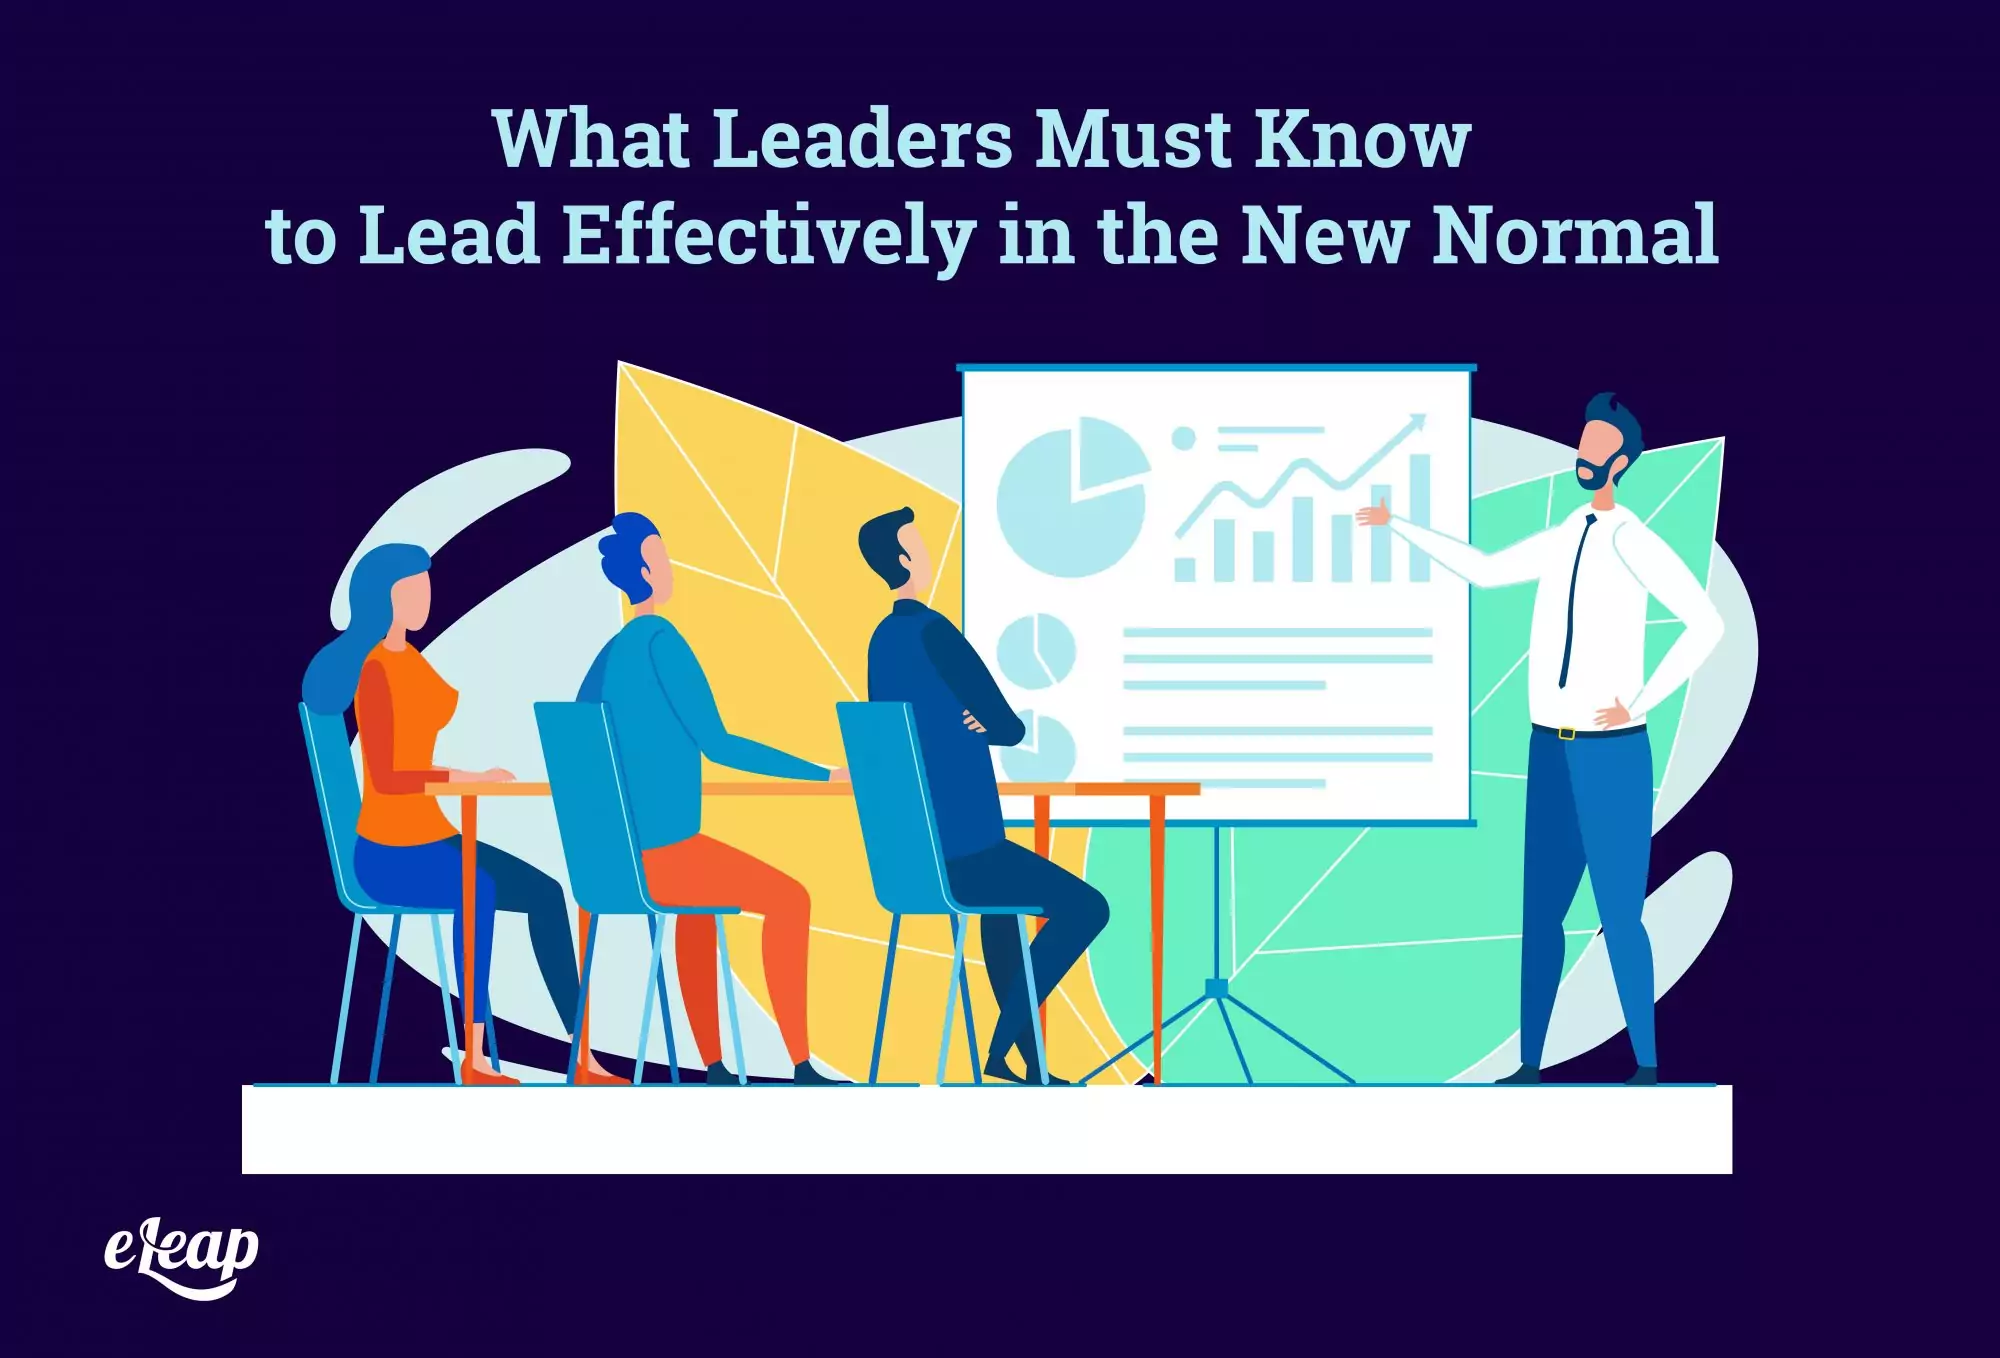 What Leaders Must Know to Lead Effectively in the New Normal